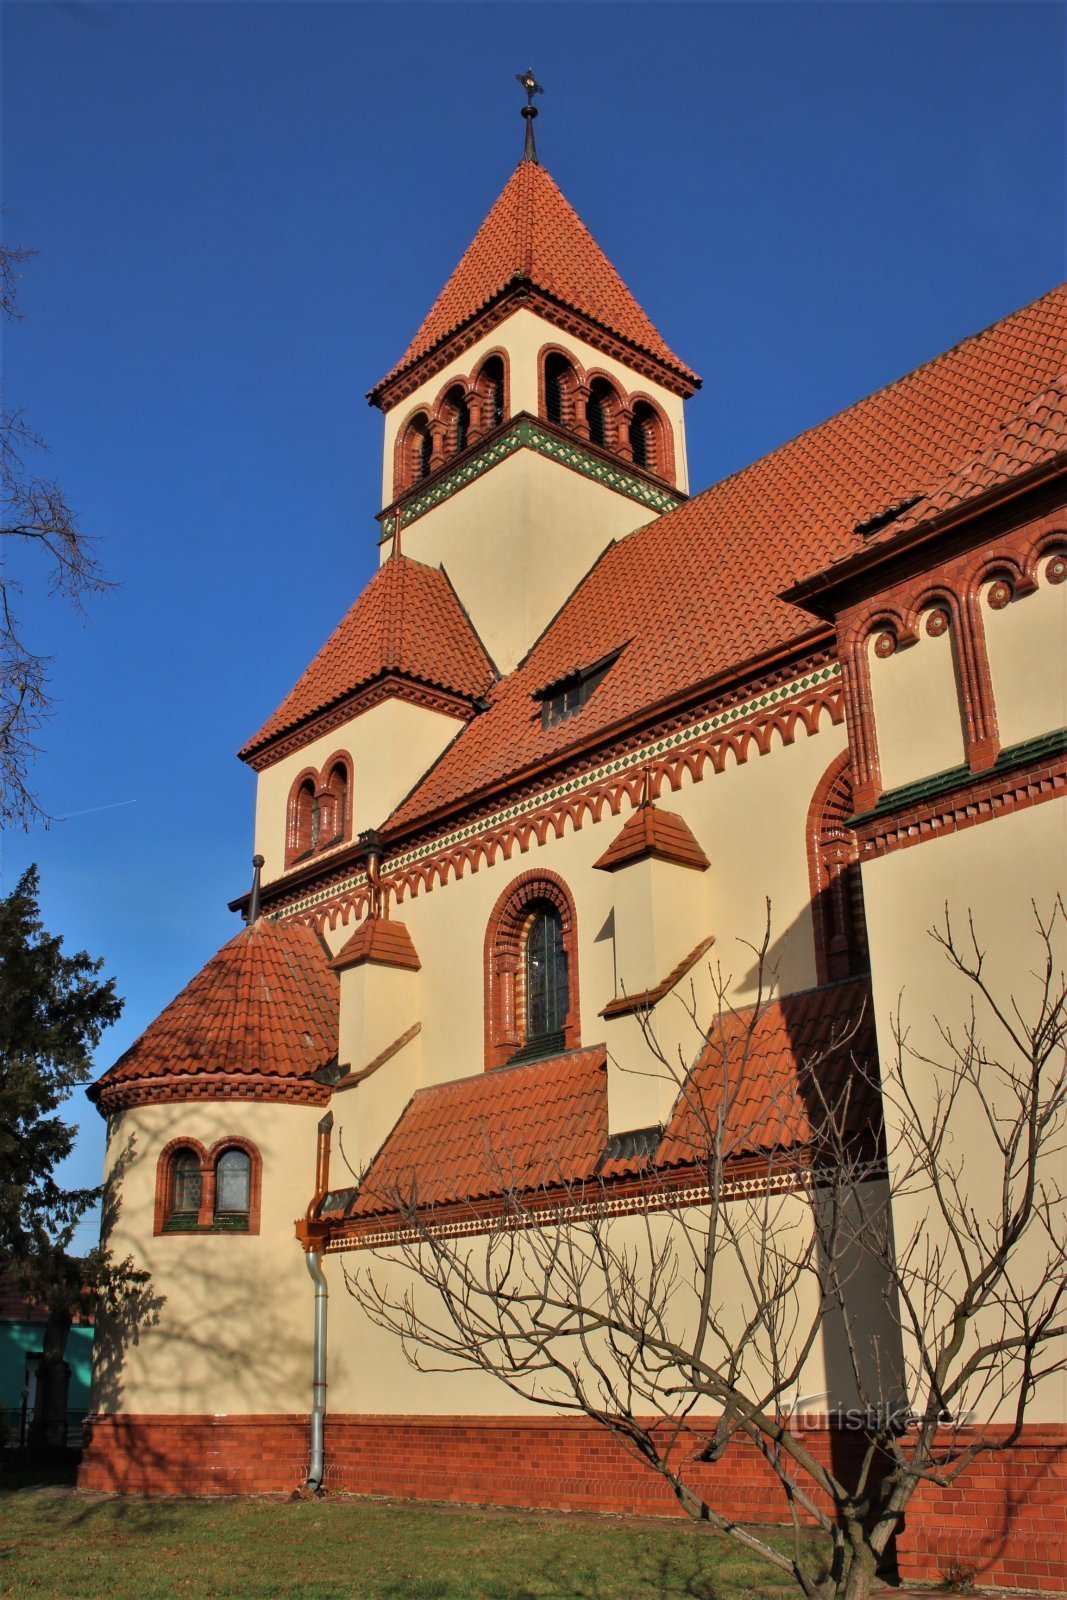 View of the front part with the church tower